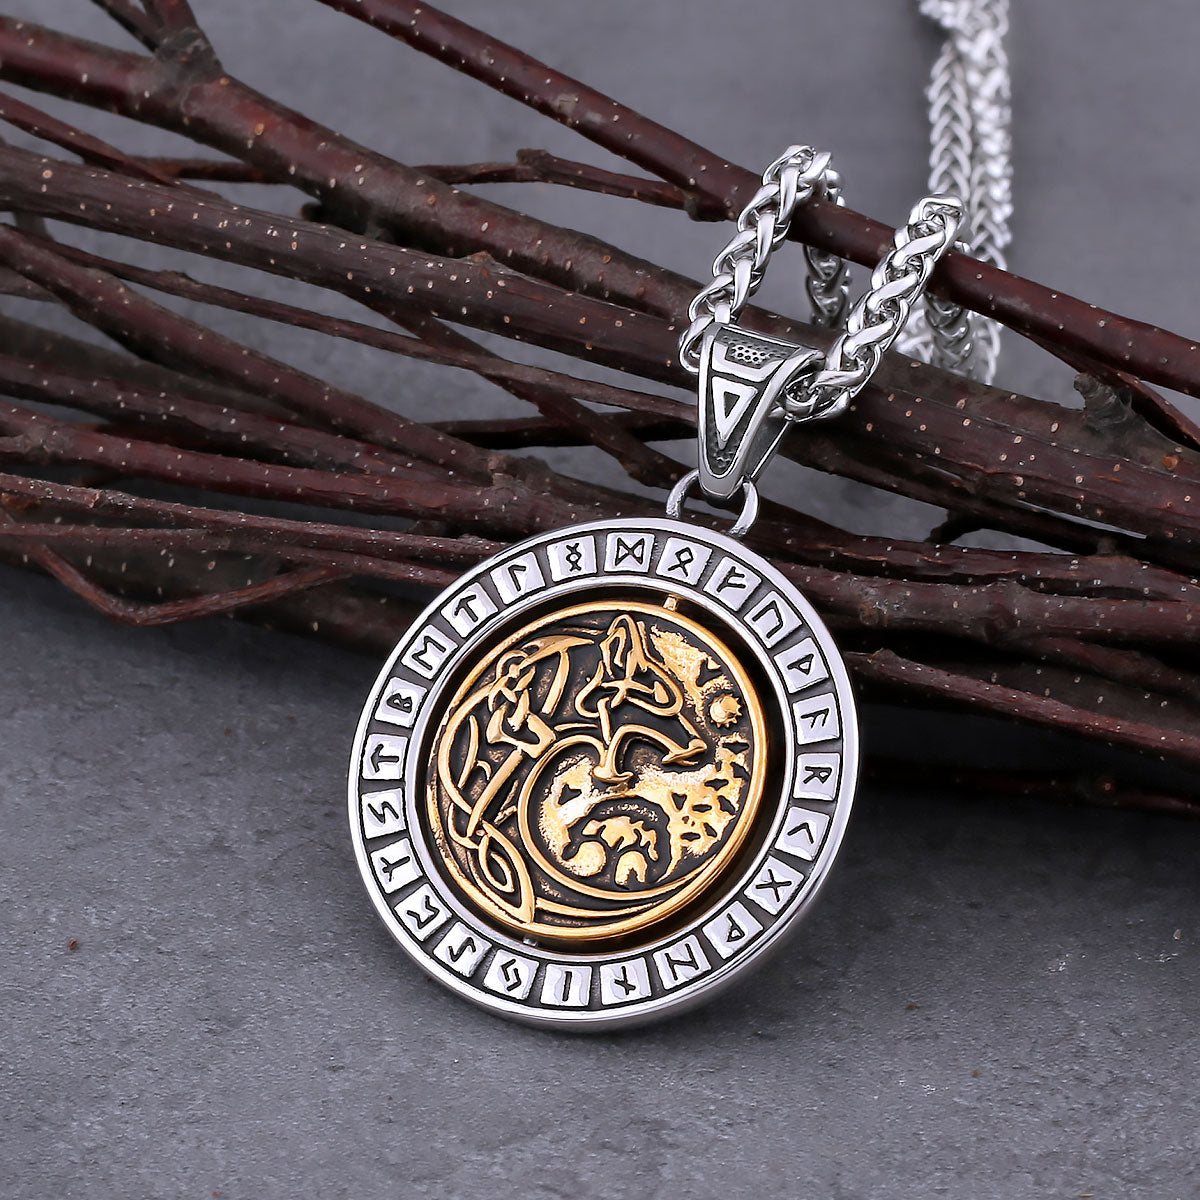 Rotate Vikings Wolf Necklace Stainless Steel Men's Tree of Life Odin Rune Amulet Pendant Necklace Vintage Charm Jewelry As Gift 60cm chain